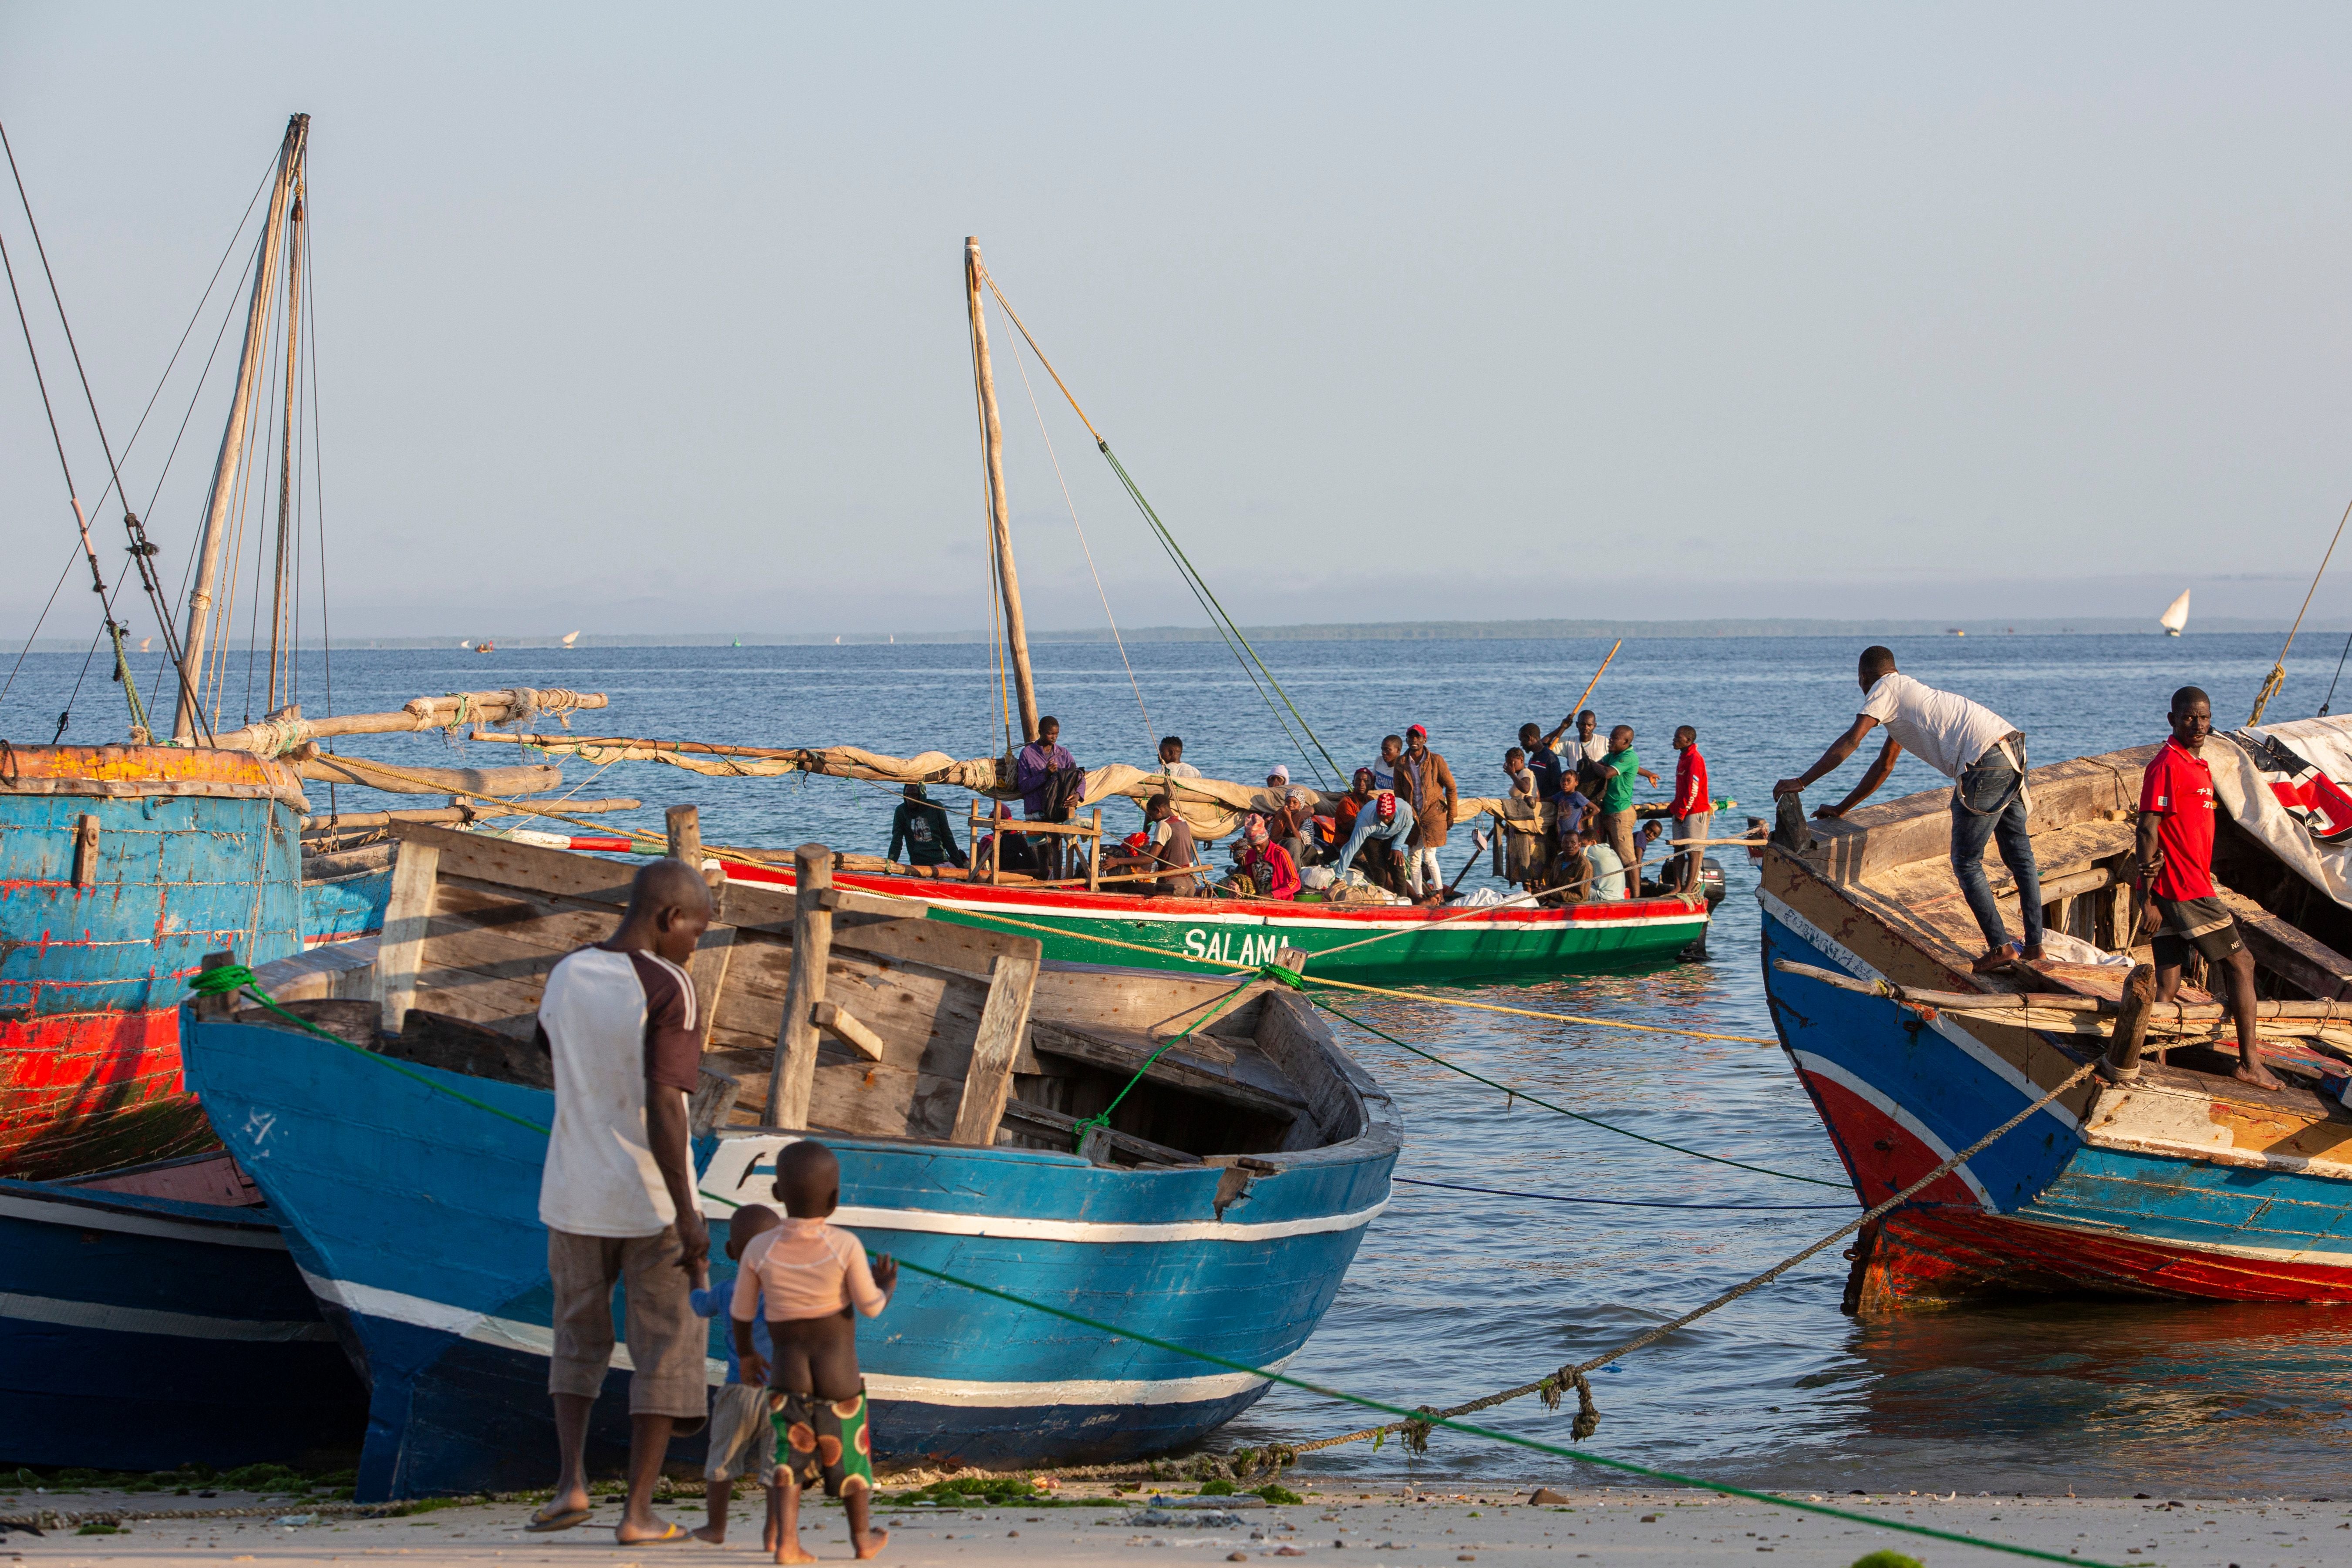 File: Fishermen tend to their boats on shores of Paquitequete neighborhood in Pemba